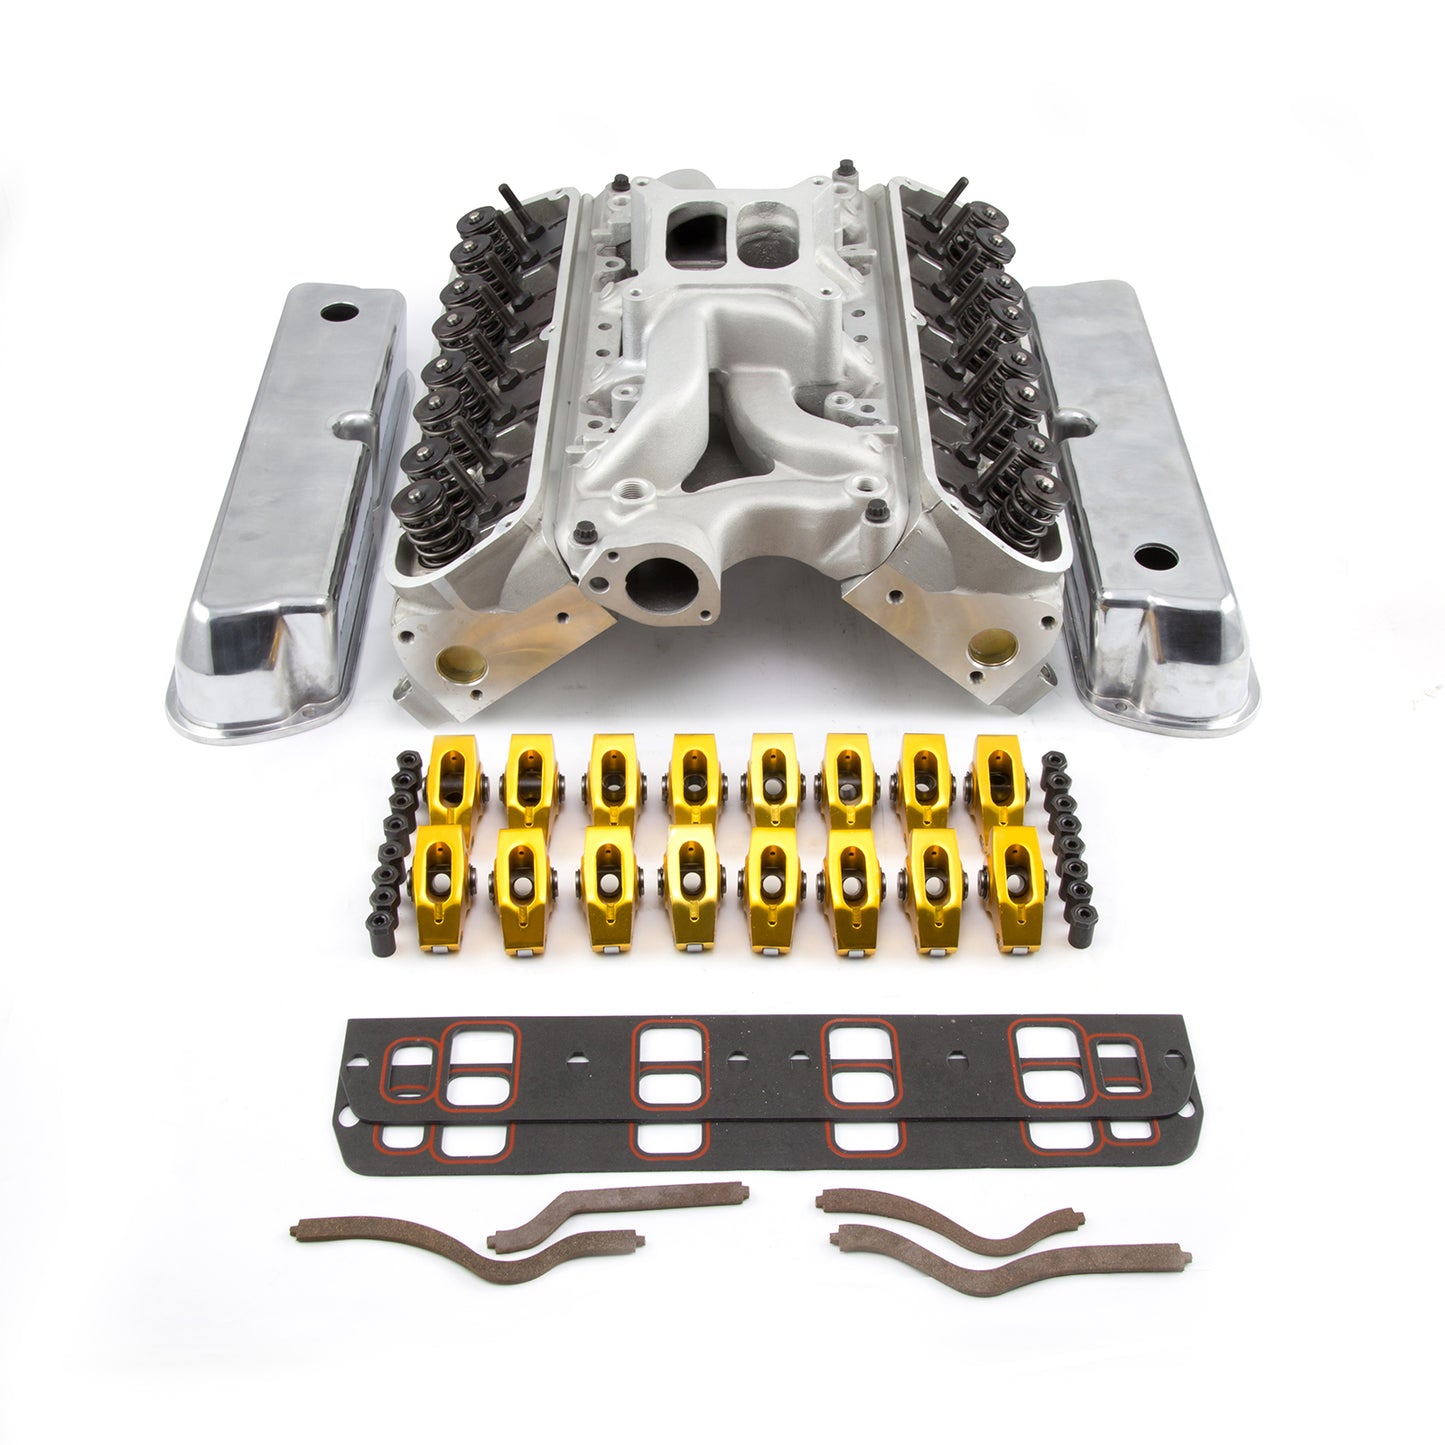 Speedmaster PCE435.1066 Fits Ford SB 289 302 Hyd FT Cylinder Head Top End Engine Combo Kit